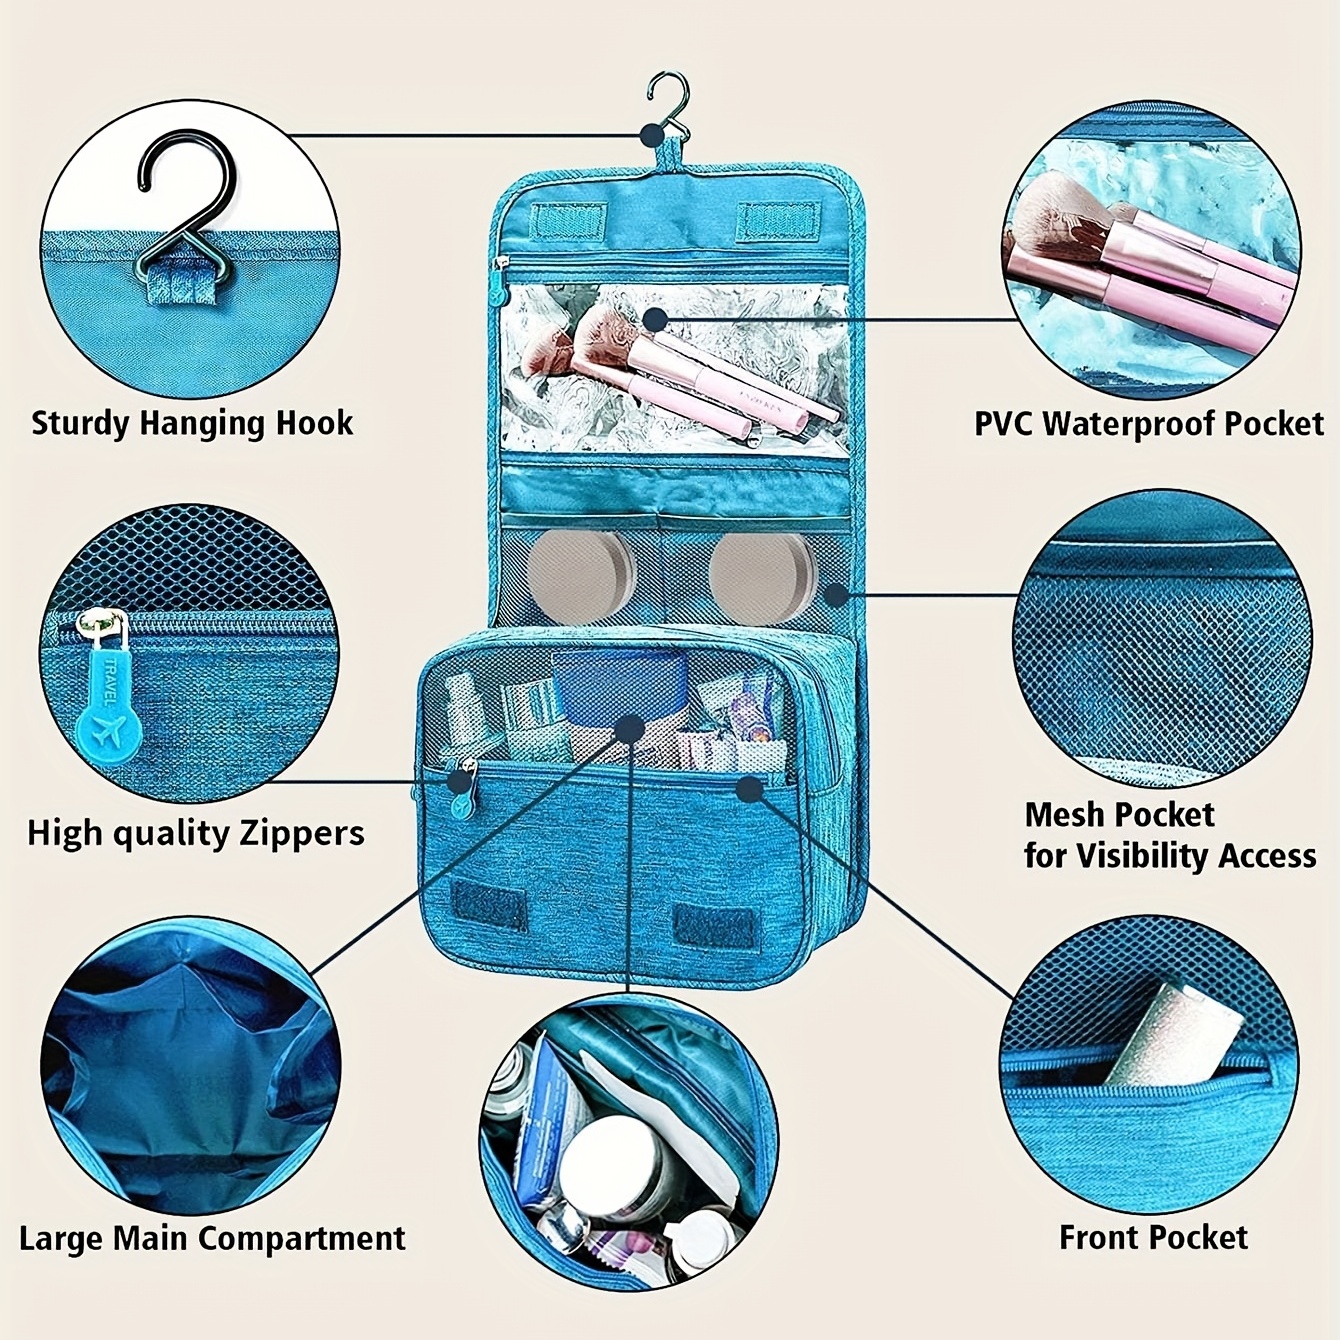 Foldable 5 Pocket Polyester Toiletry Cosmetic Hanging Storage Bag